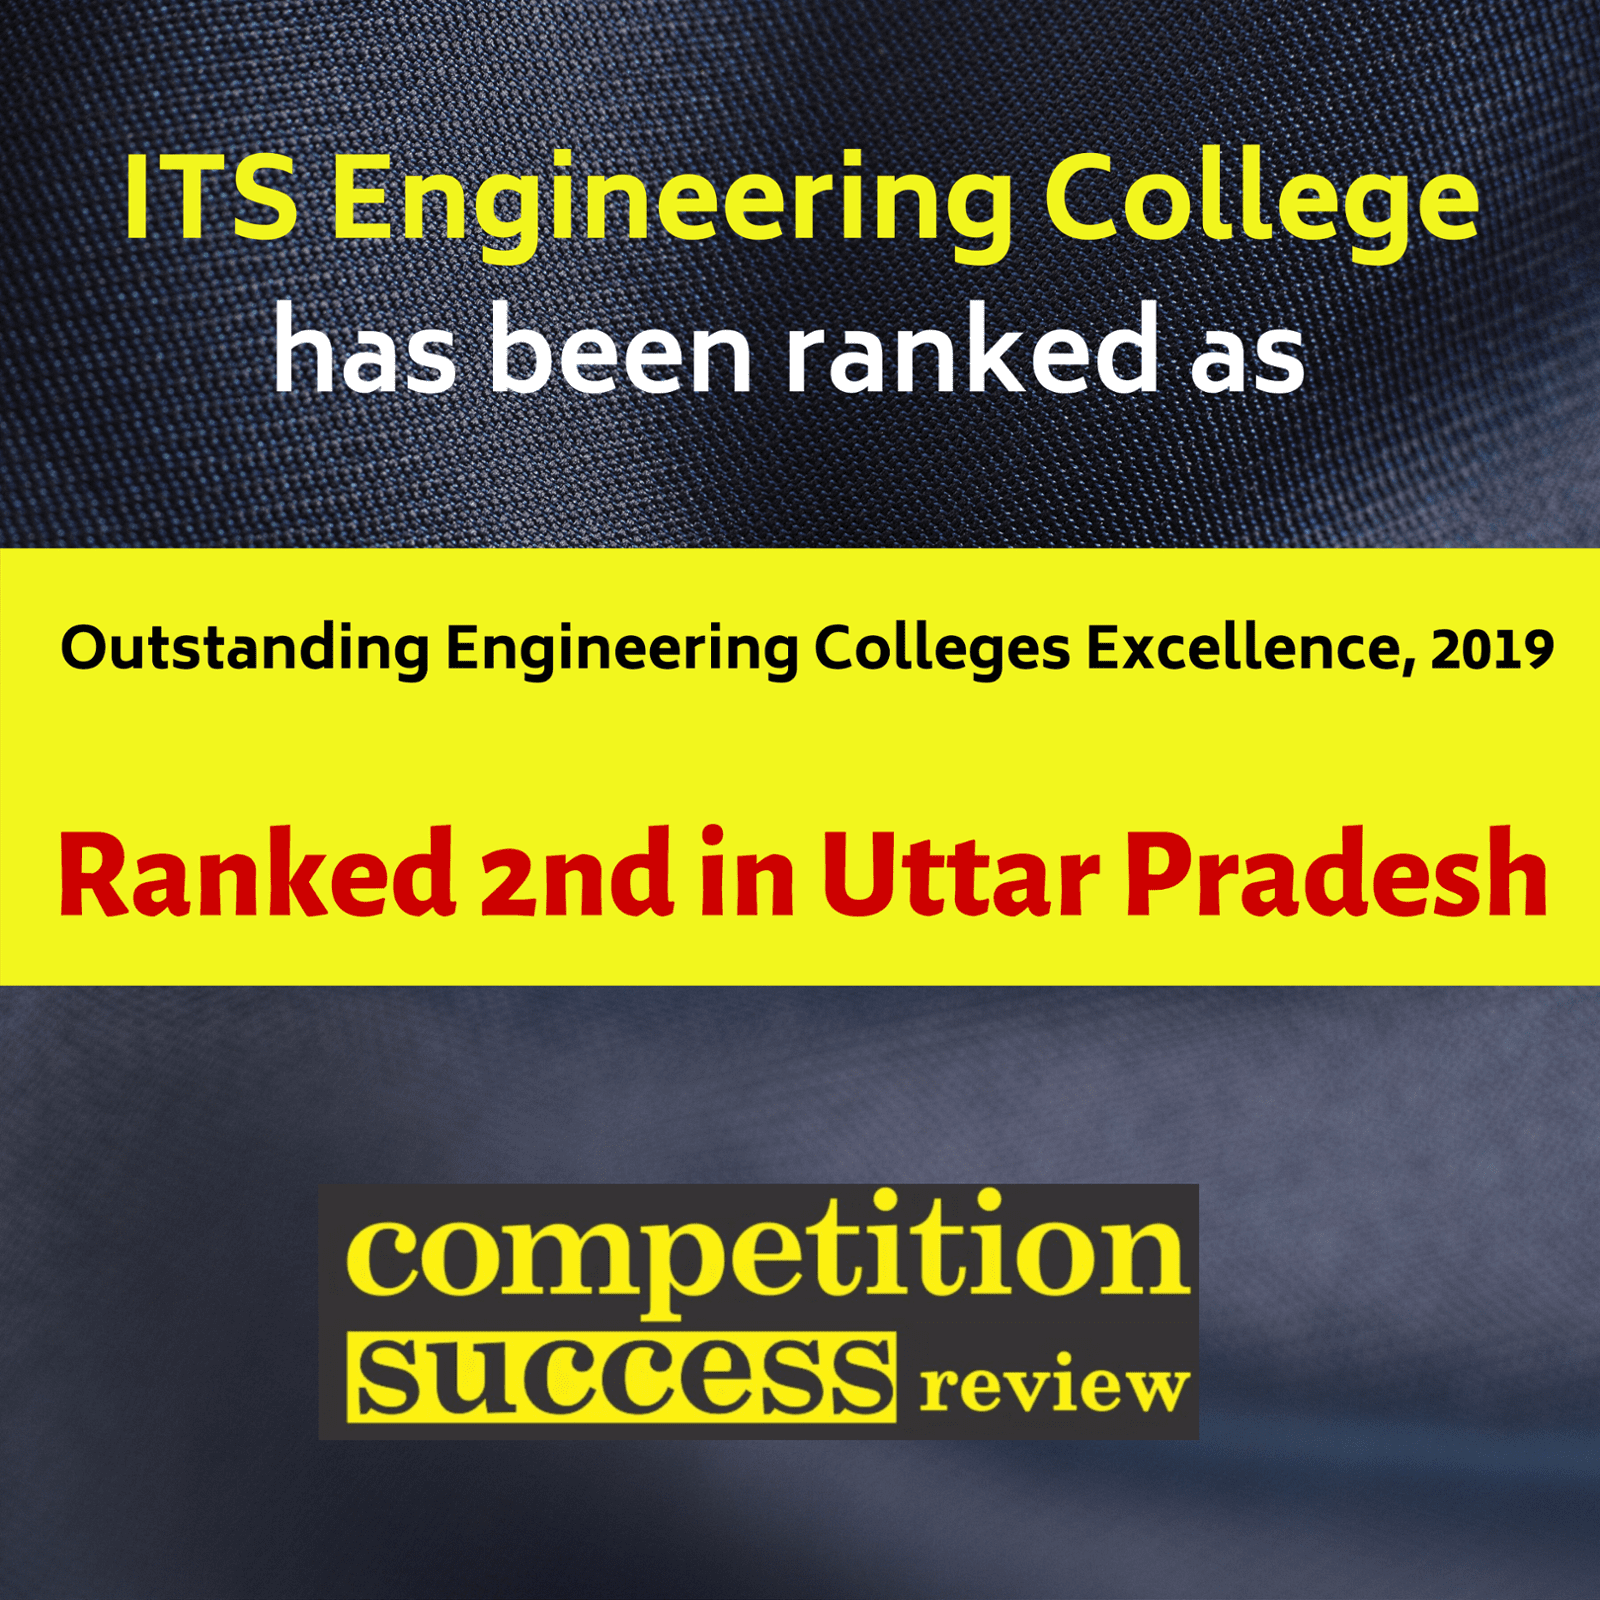 ITS Ranked 2 in UP by Competition Success Review